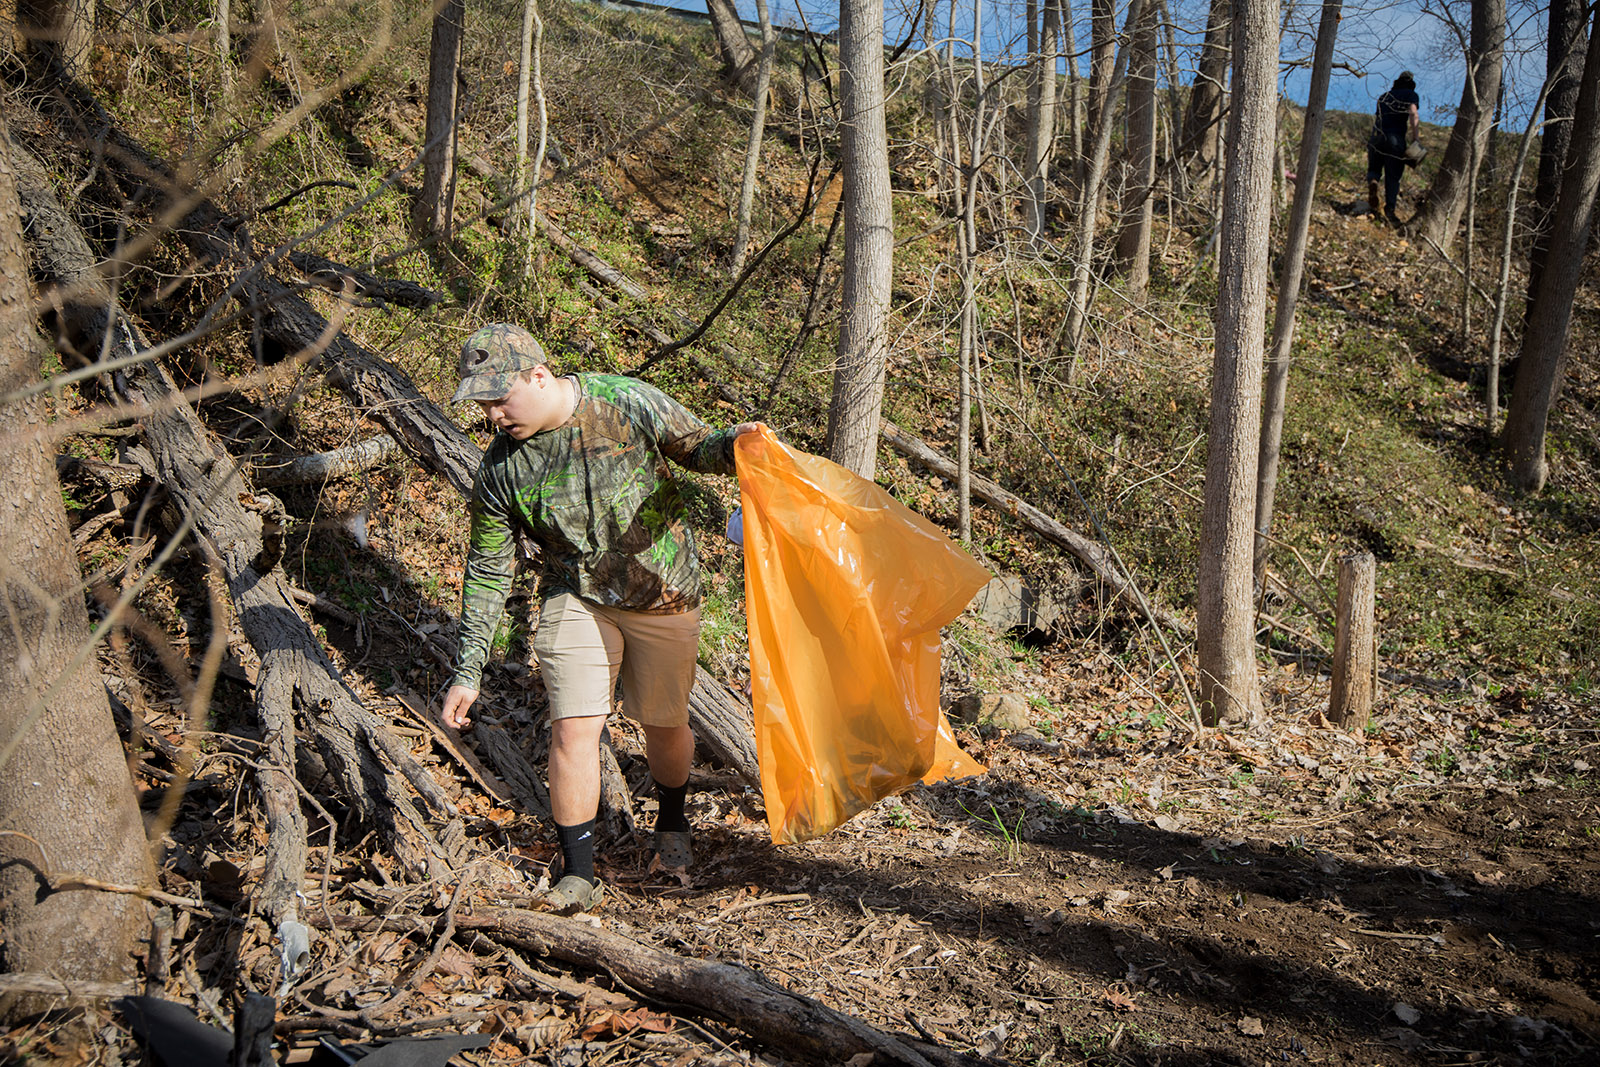 An image of a man in camouflage with a bright orange trash bag picking up garbage in a forest 